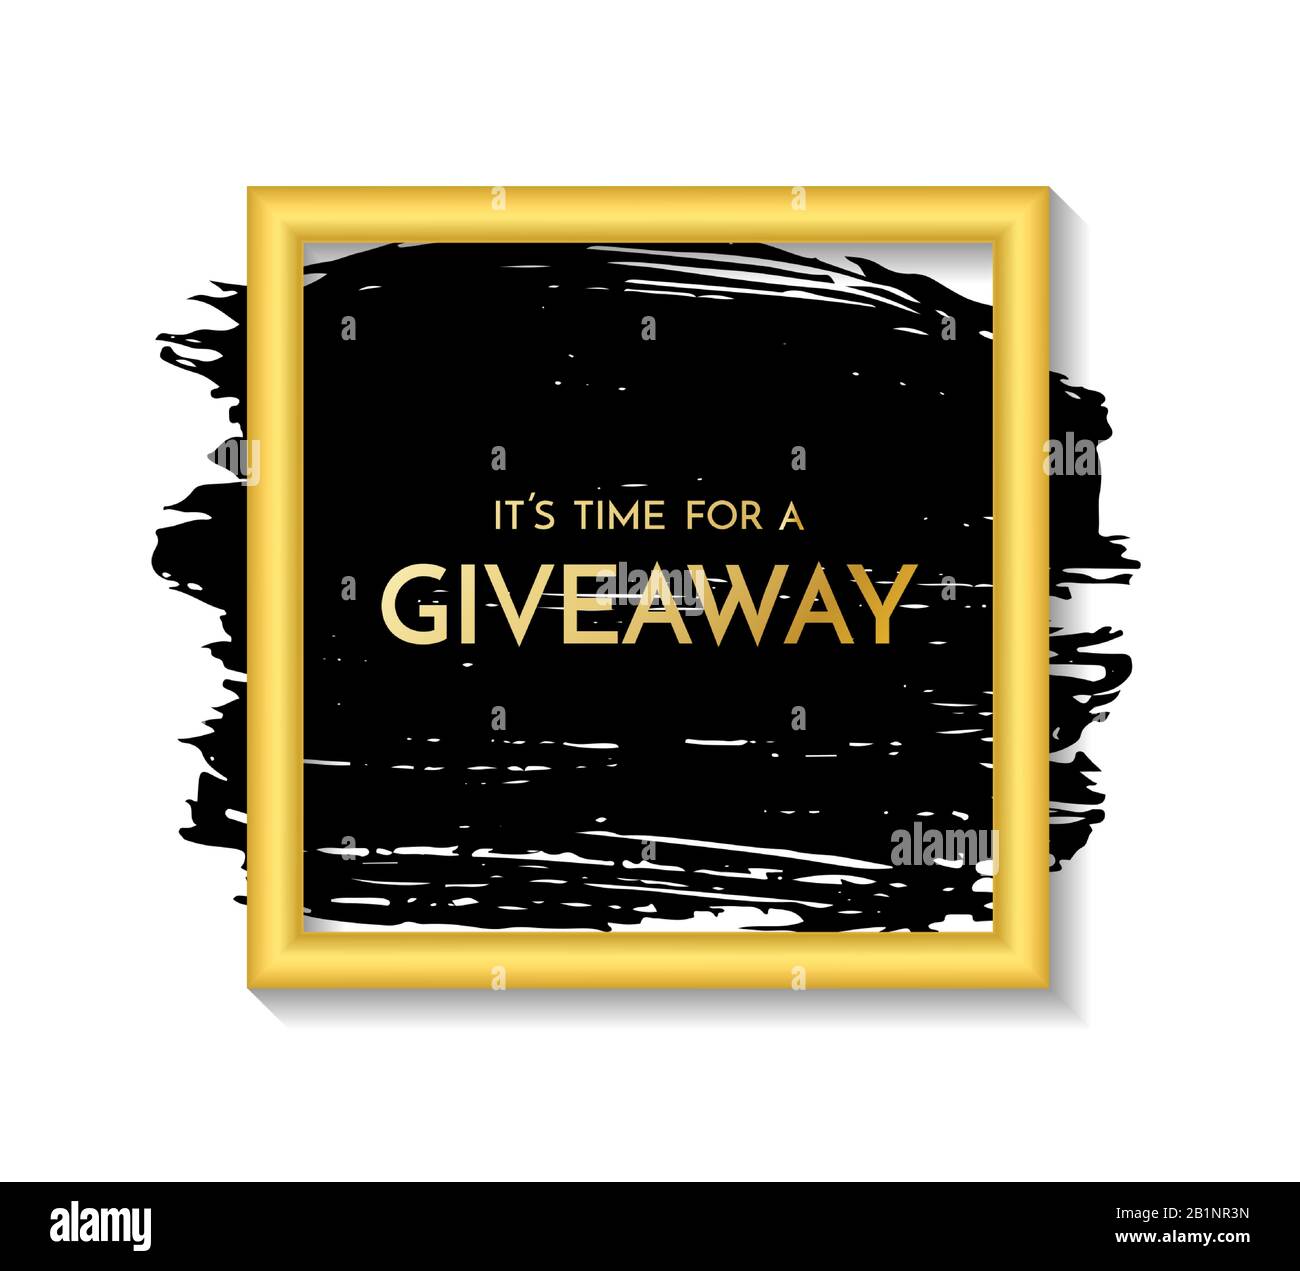 Time for a giveaway - banner template. It s time for a Giveaway phrase on gold and black background. Christmas and New Year giveaway - holiday baner Stock Vector